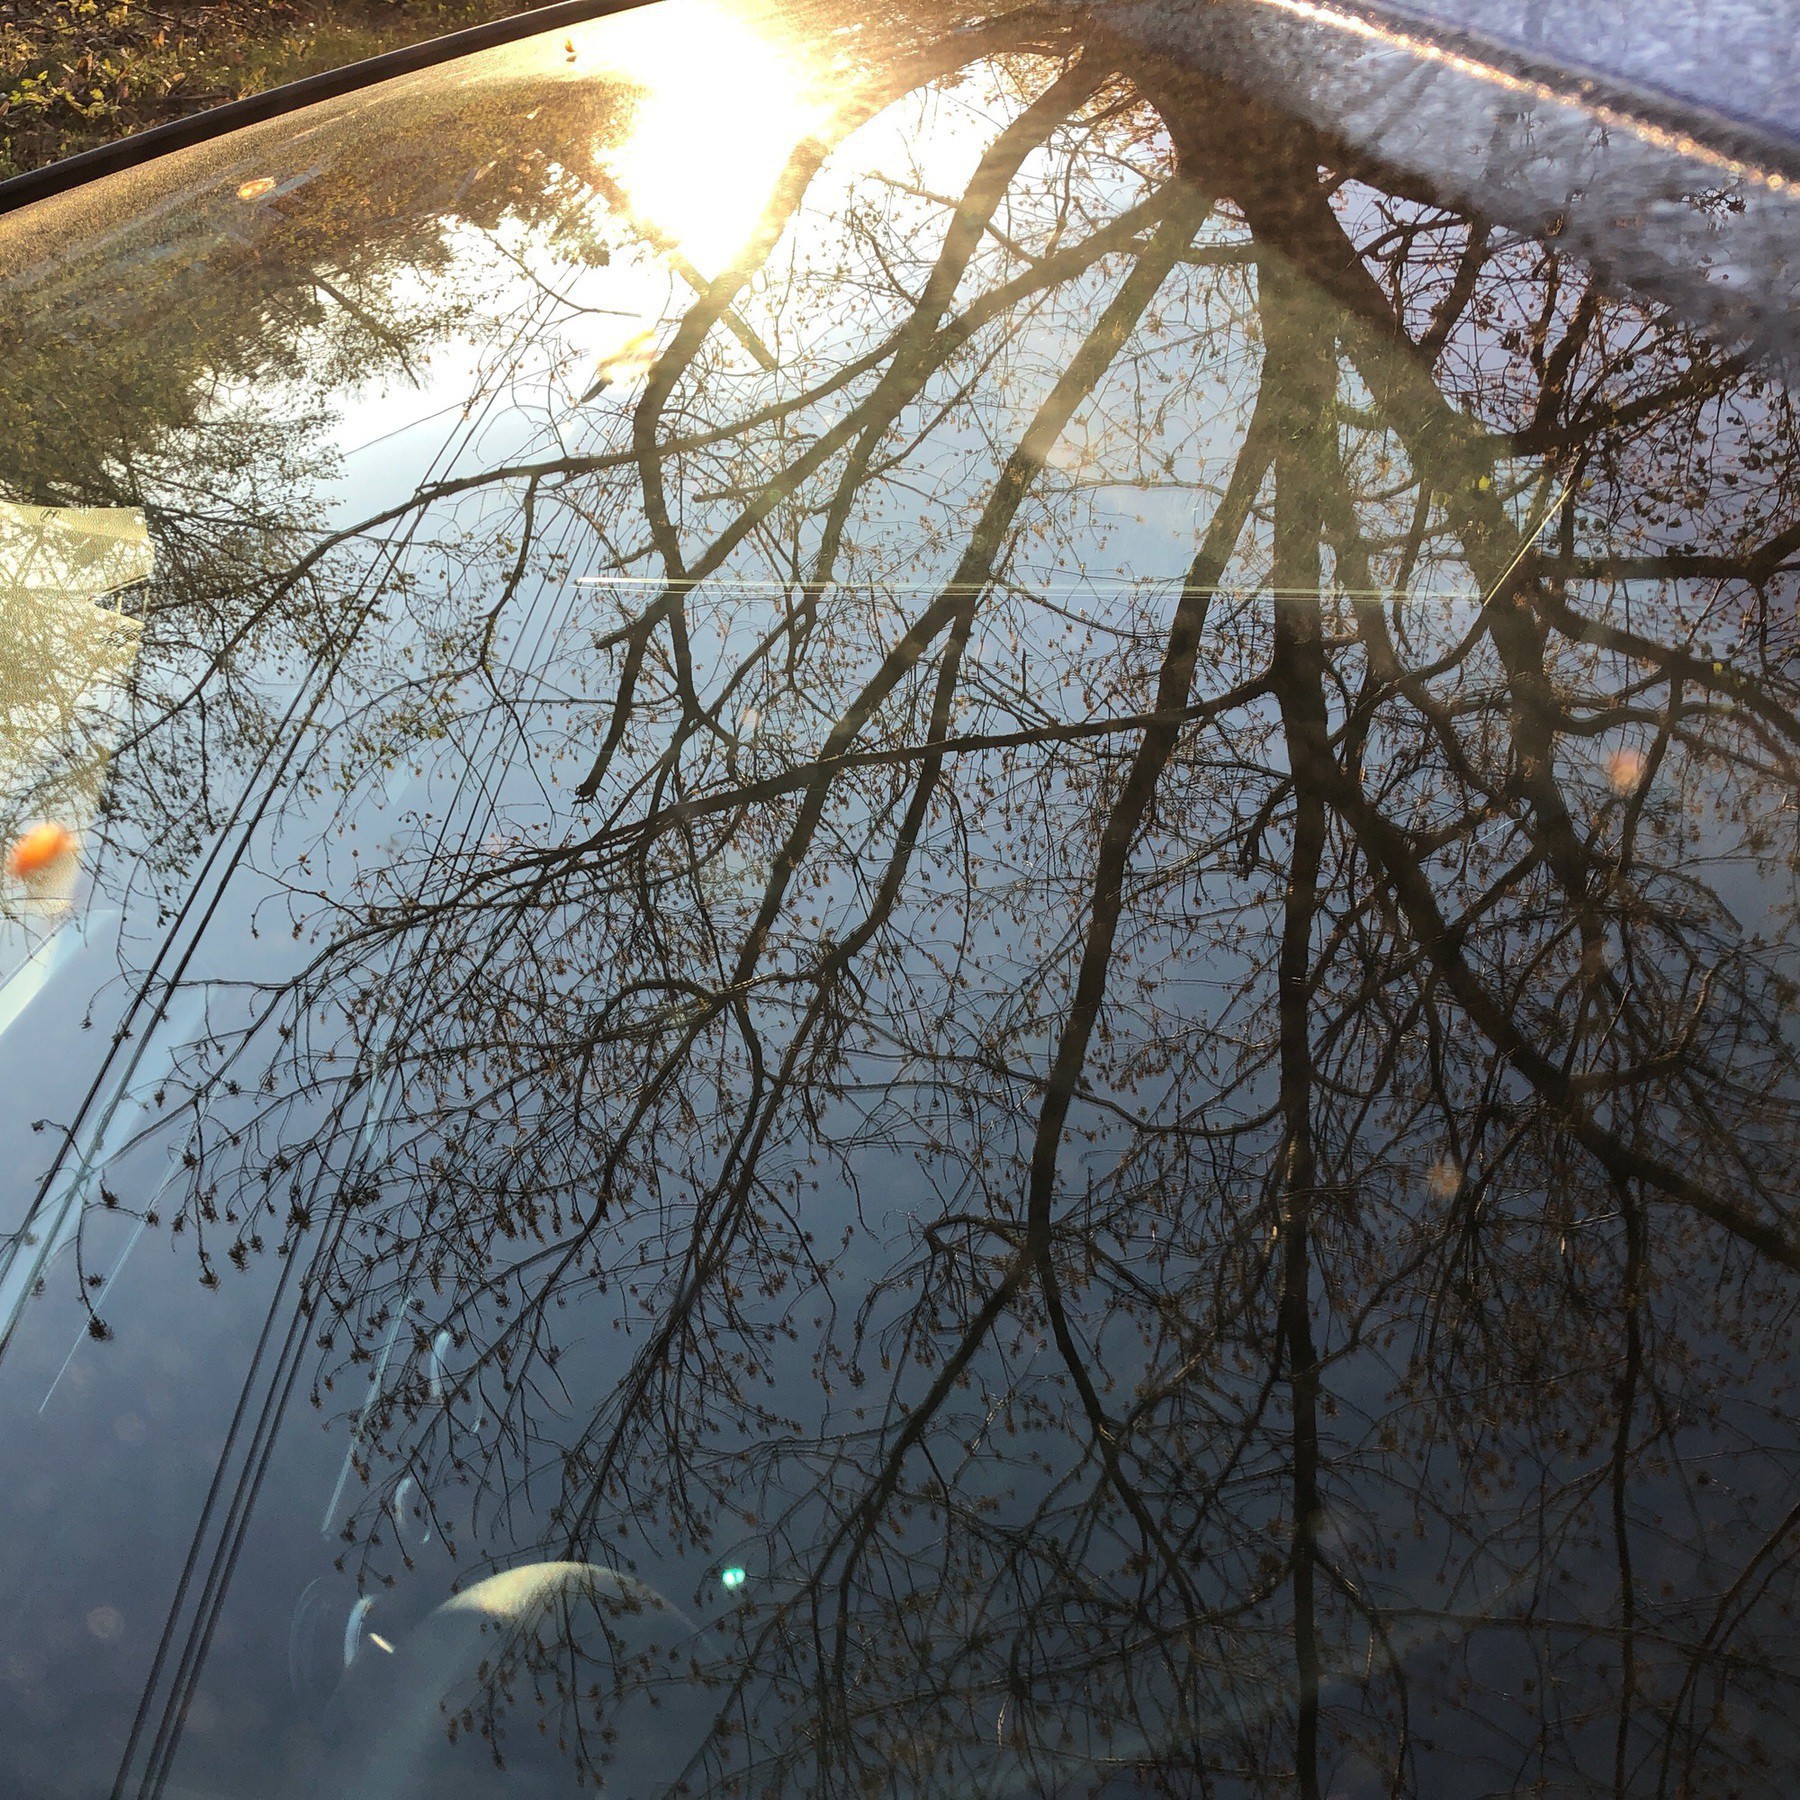 Reflection of sunlight and tree in car windshield.